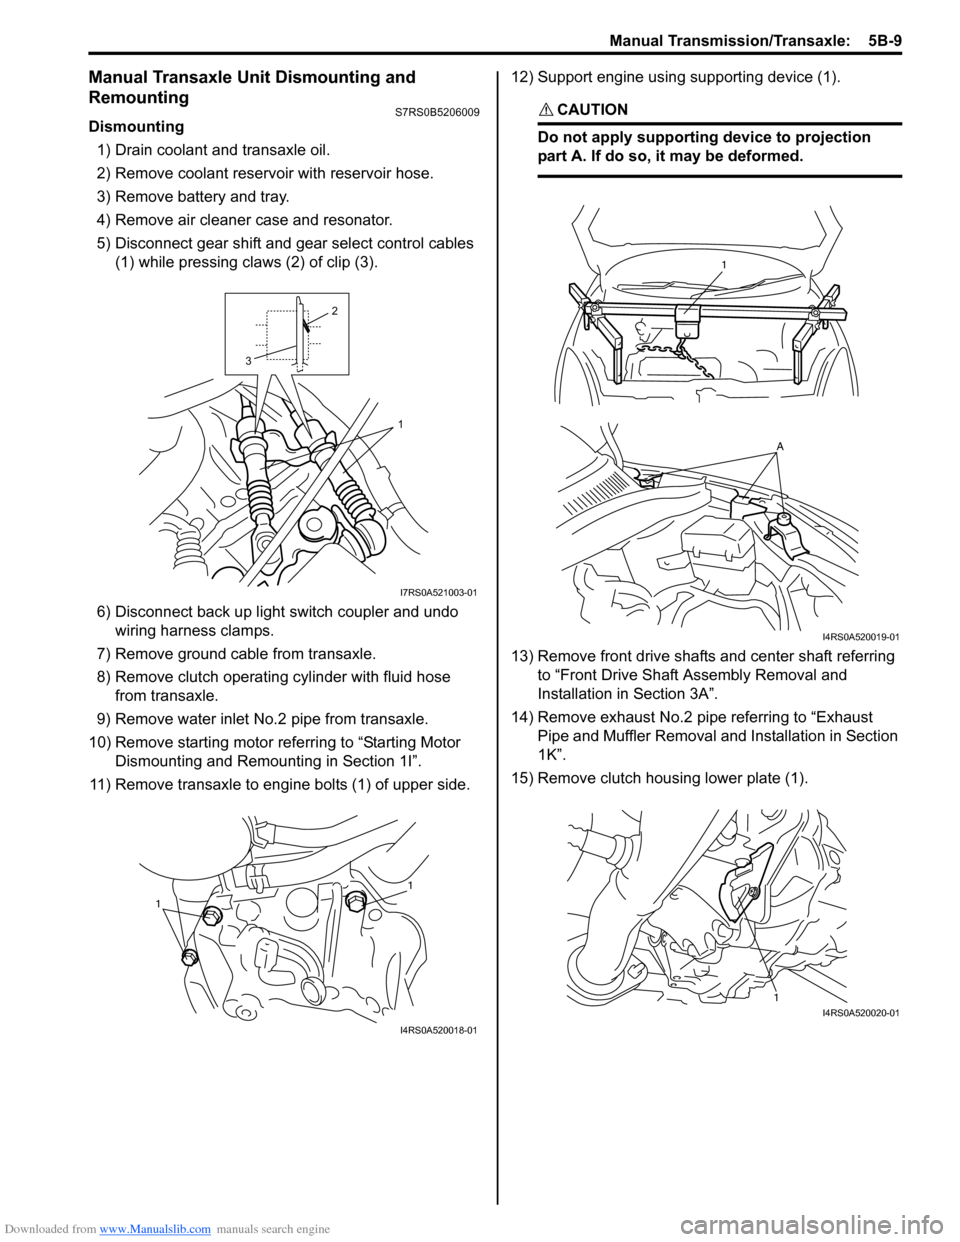 SUZUKI SWIFT 2006 2.G Service Workshop Manual Downloaded from www.Manualslib.com manuals search engine Manual Transmission/Transaxle:  5B-9
Manual Transaxle Unit Dismounting and 
Remounting
S7RS0B5206009
Dismounting1) Drain coolant and transaxle 